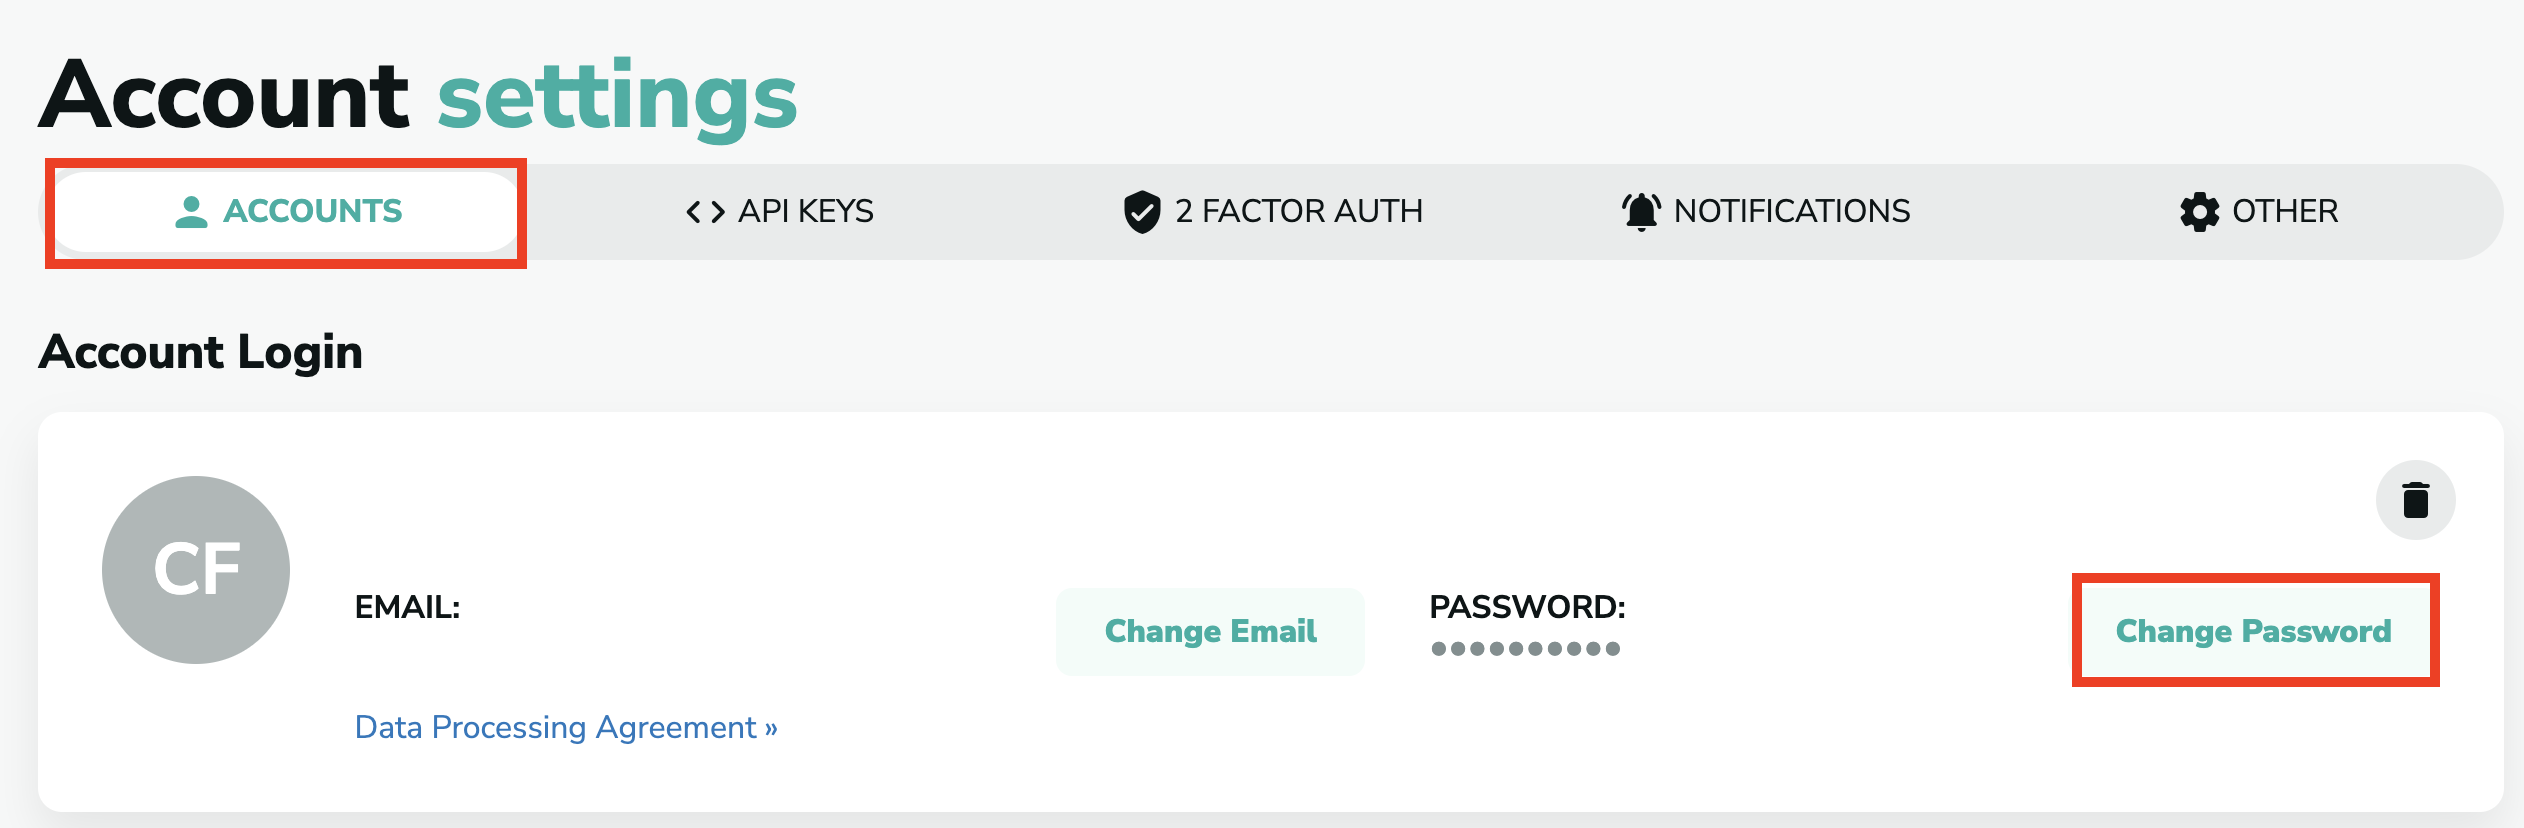 Change your password in account settings in MillionVerifier